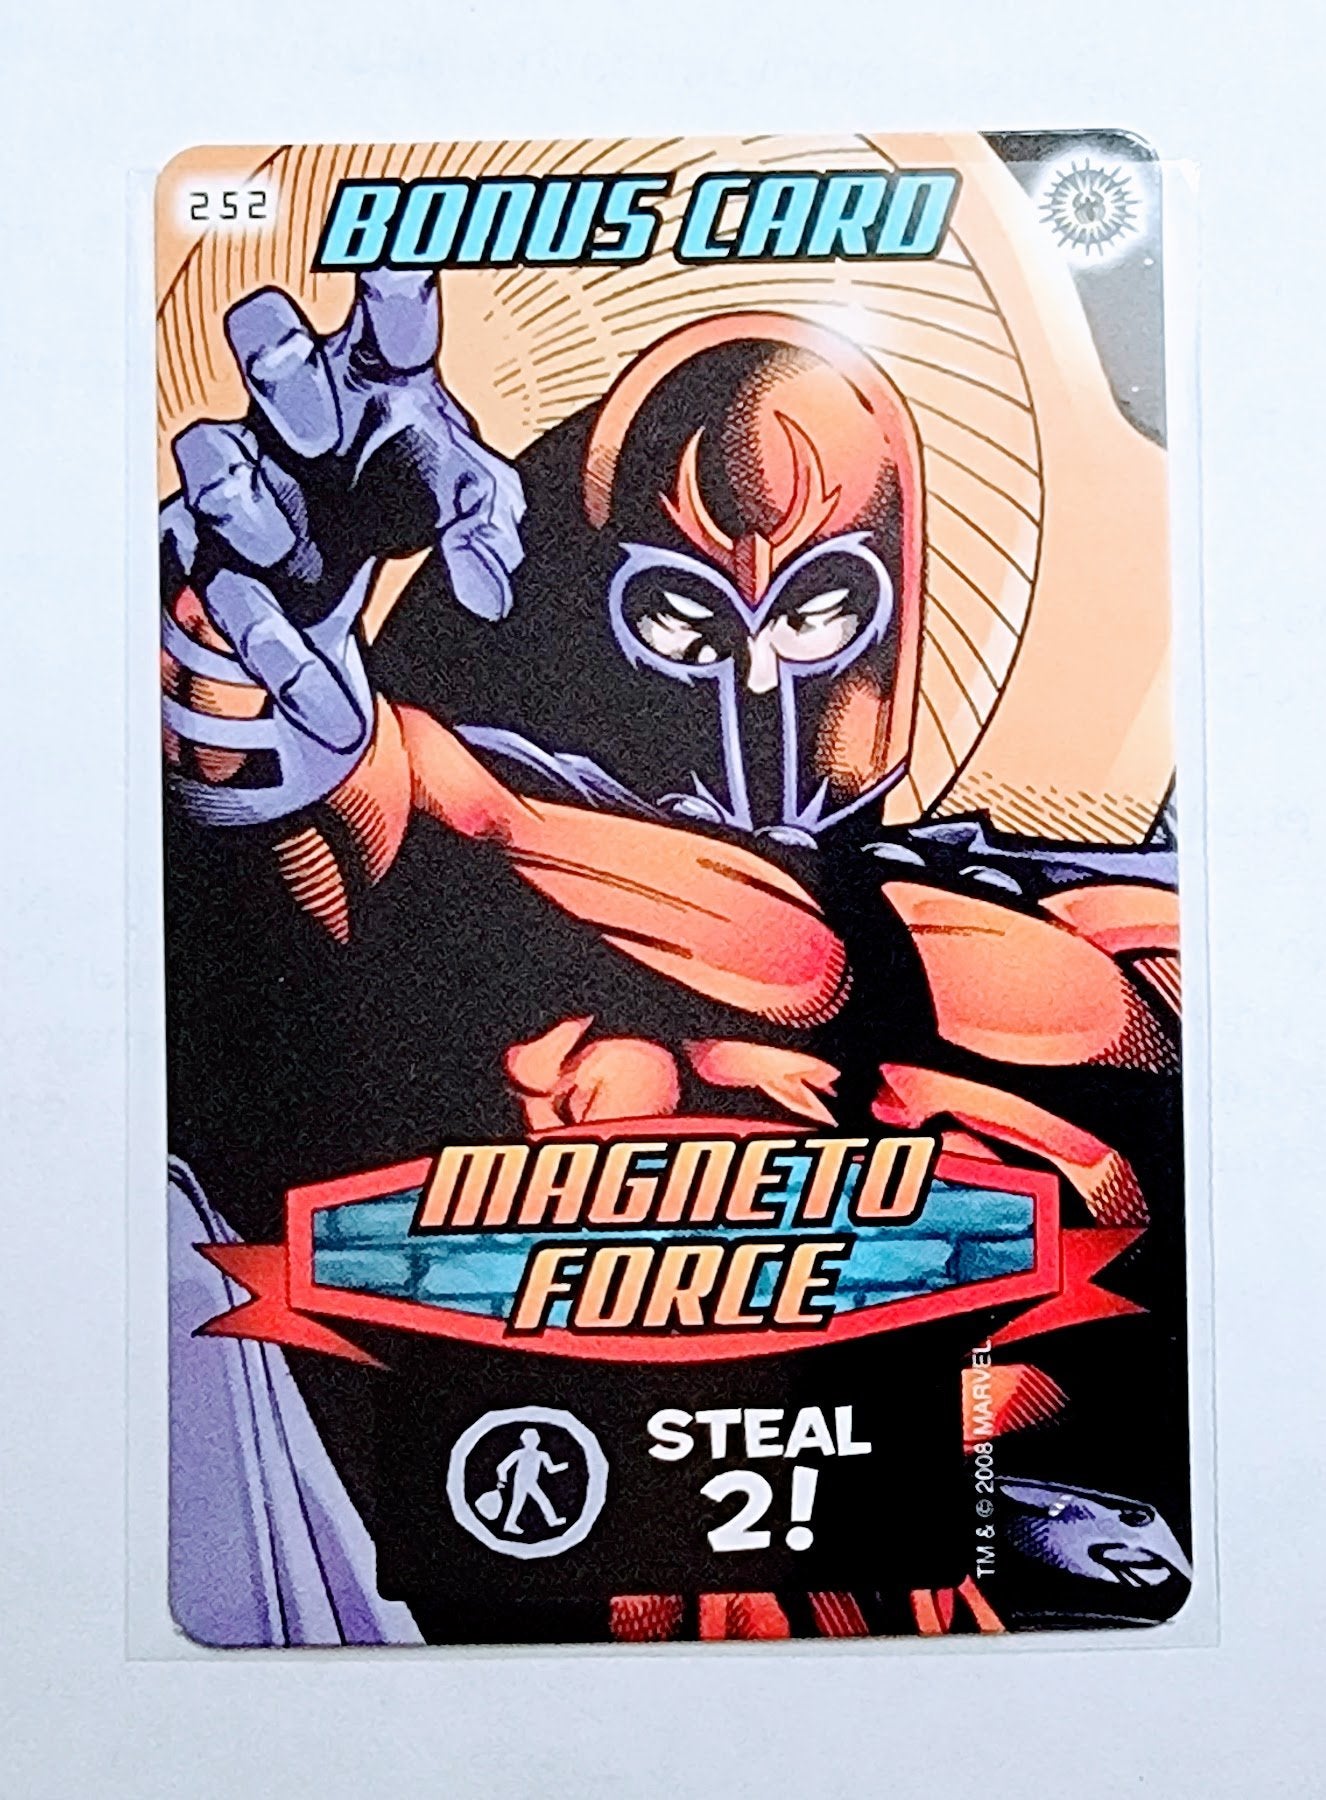 2008 Spiderman Heroes and Villains Magneto Force Bonus Card #252 Marvel Booster Trading Card UPTI simple Xclusive Collectibles   